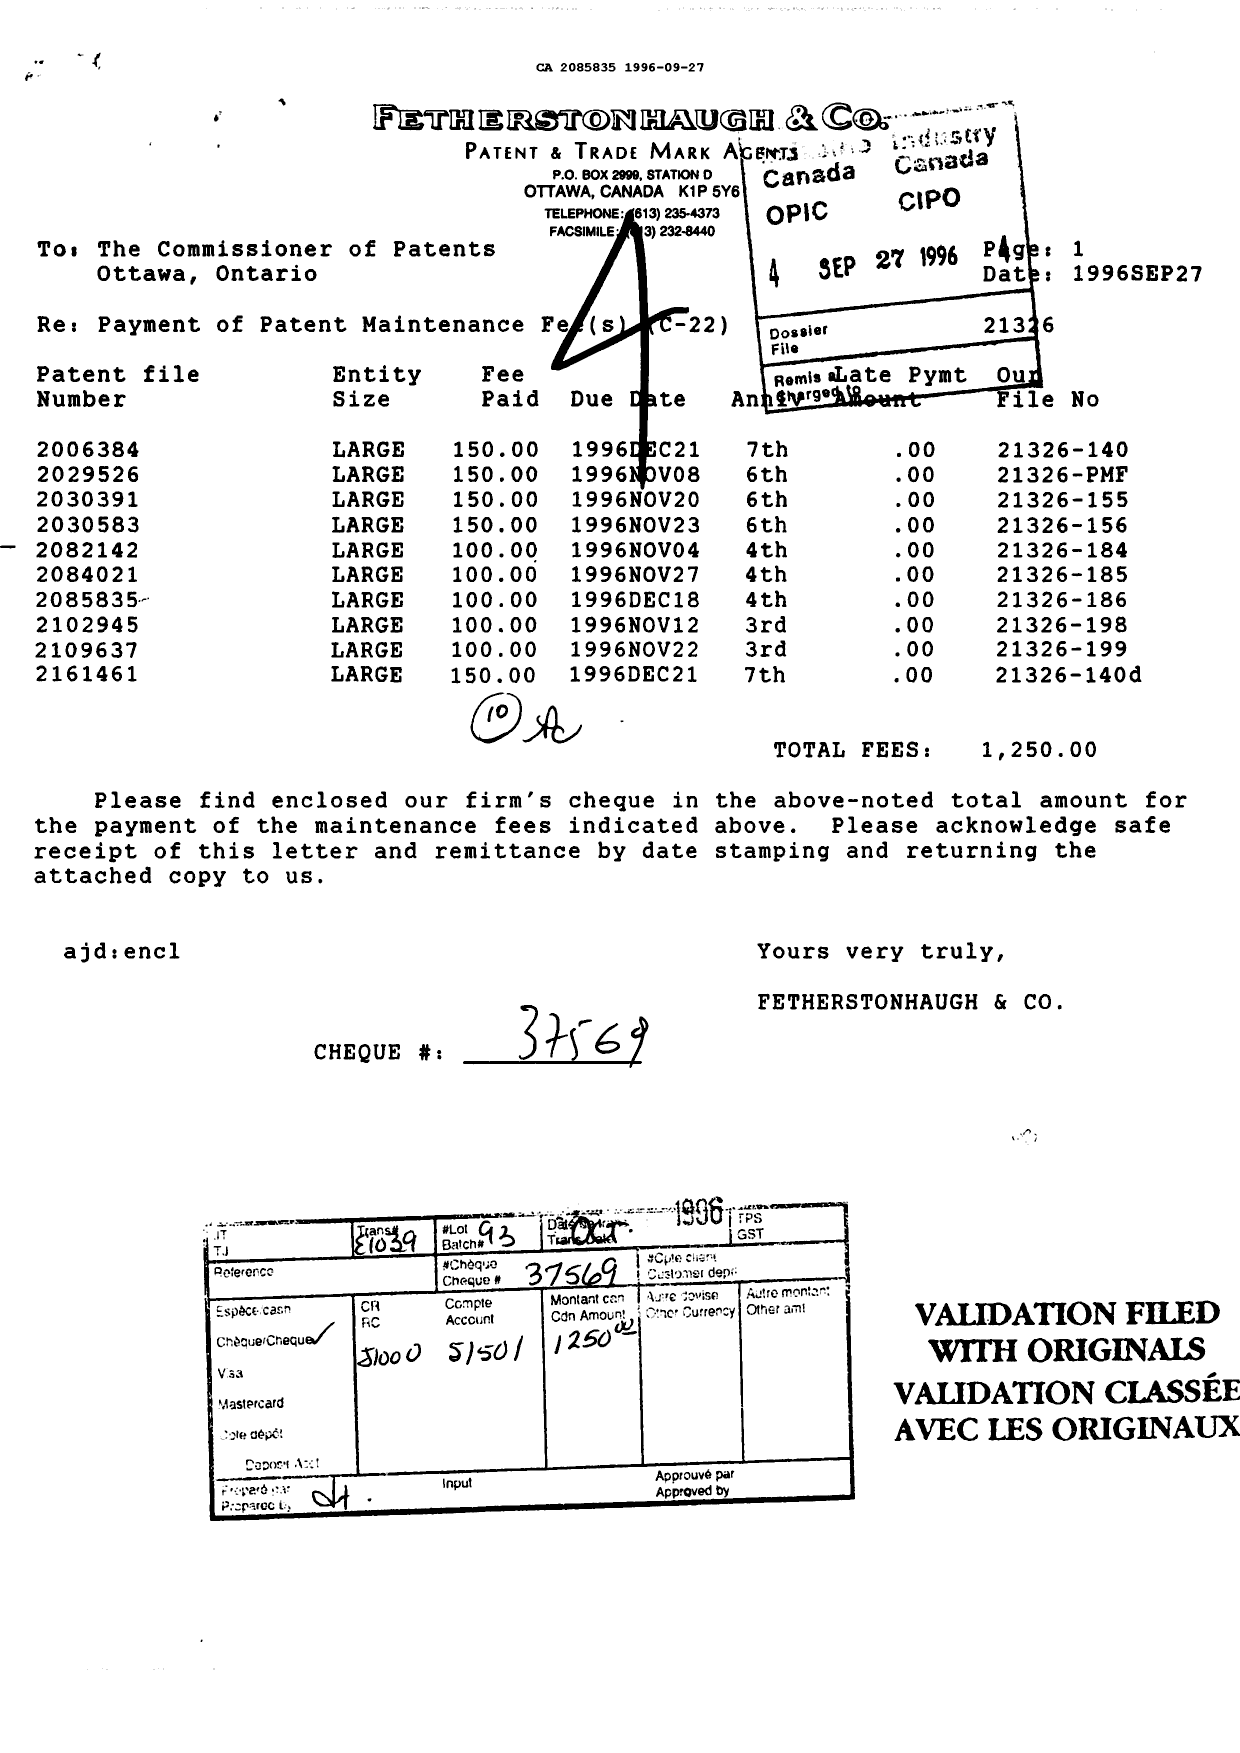 Canadian Patent Document 2085835. Maintenance Fee Payment 19960927. Image 1 of 1